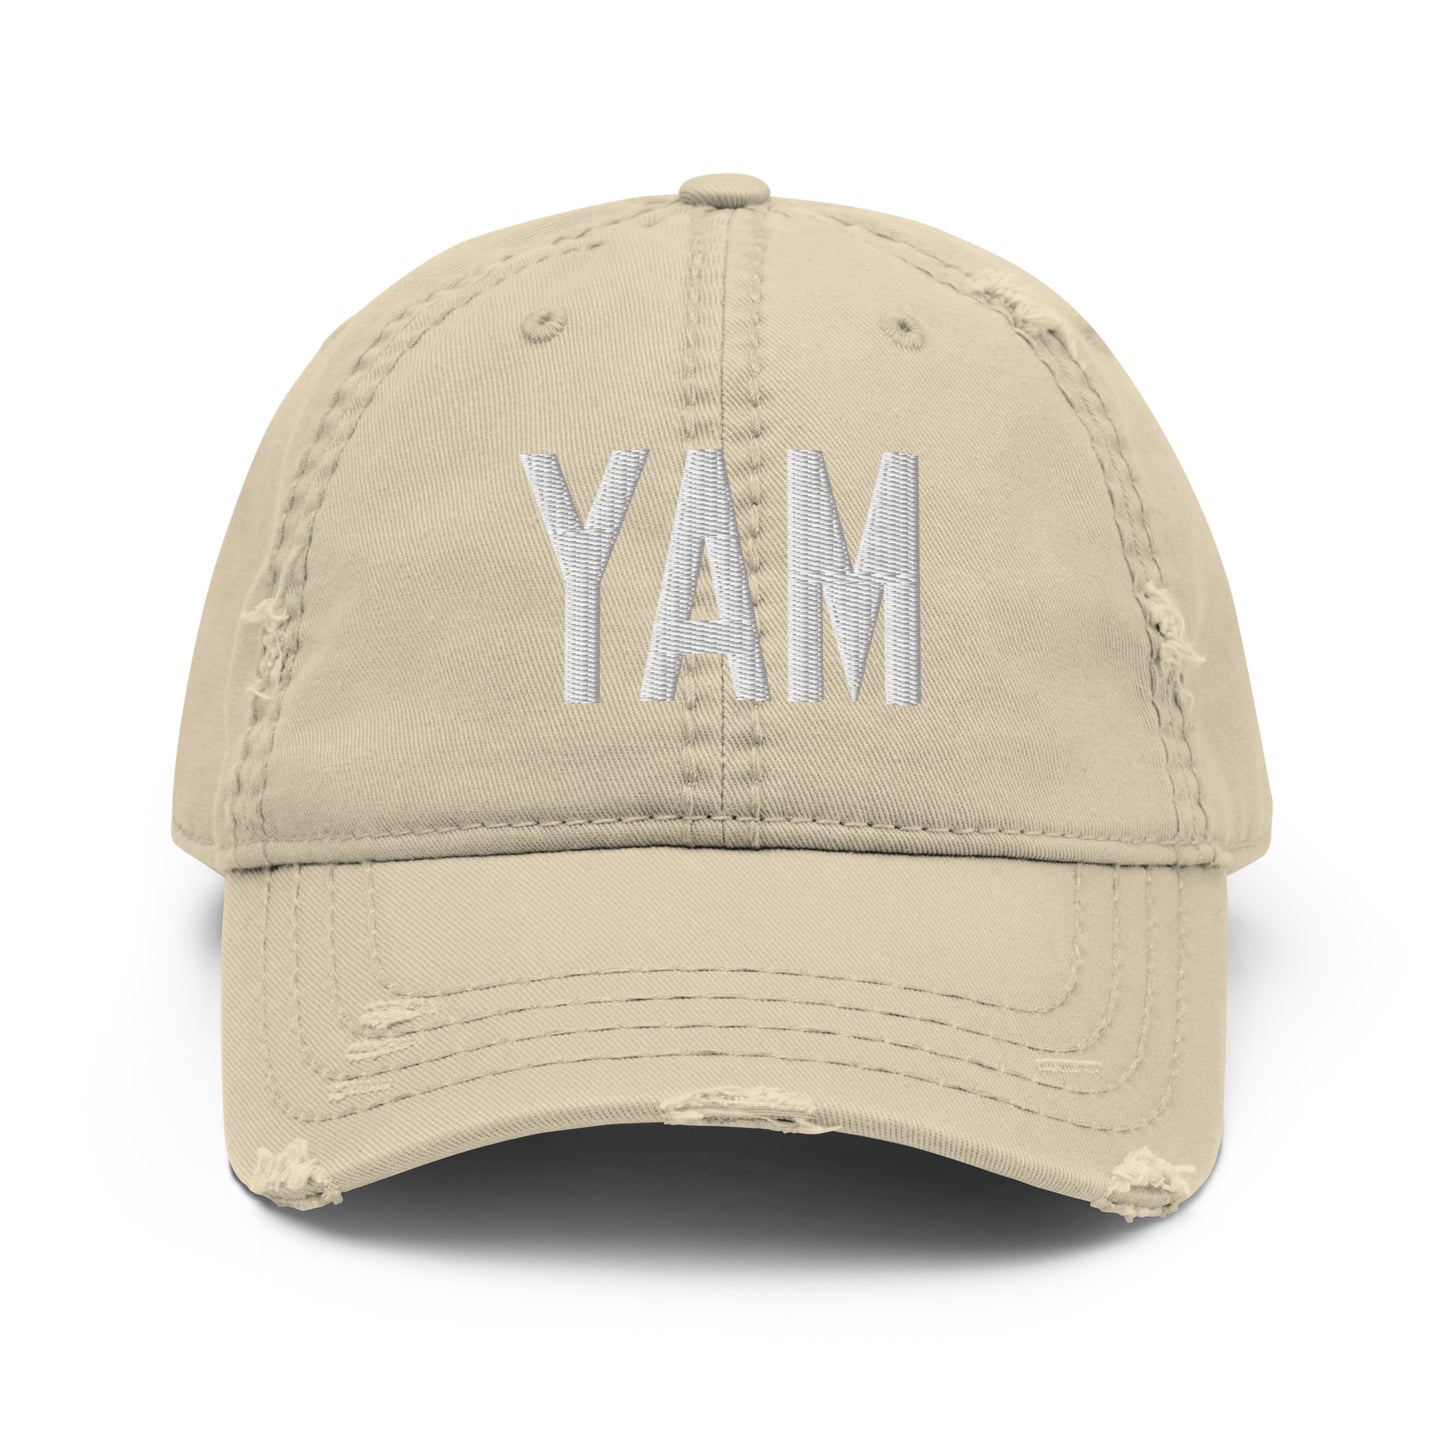 Airport Code Distressed Hat - White • YAM Sault-Ste-Marie • YHM Designs - Image 18